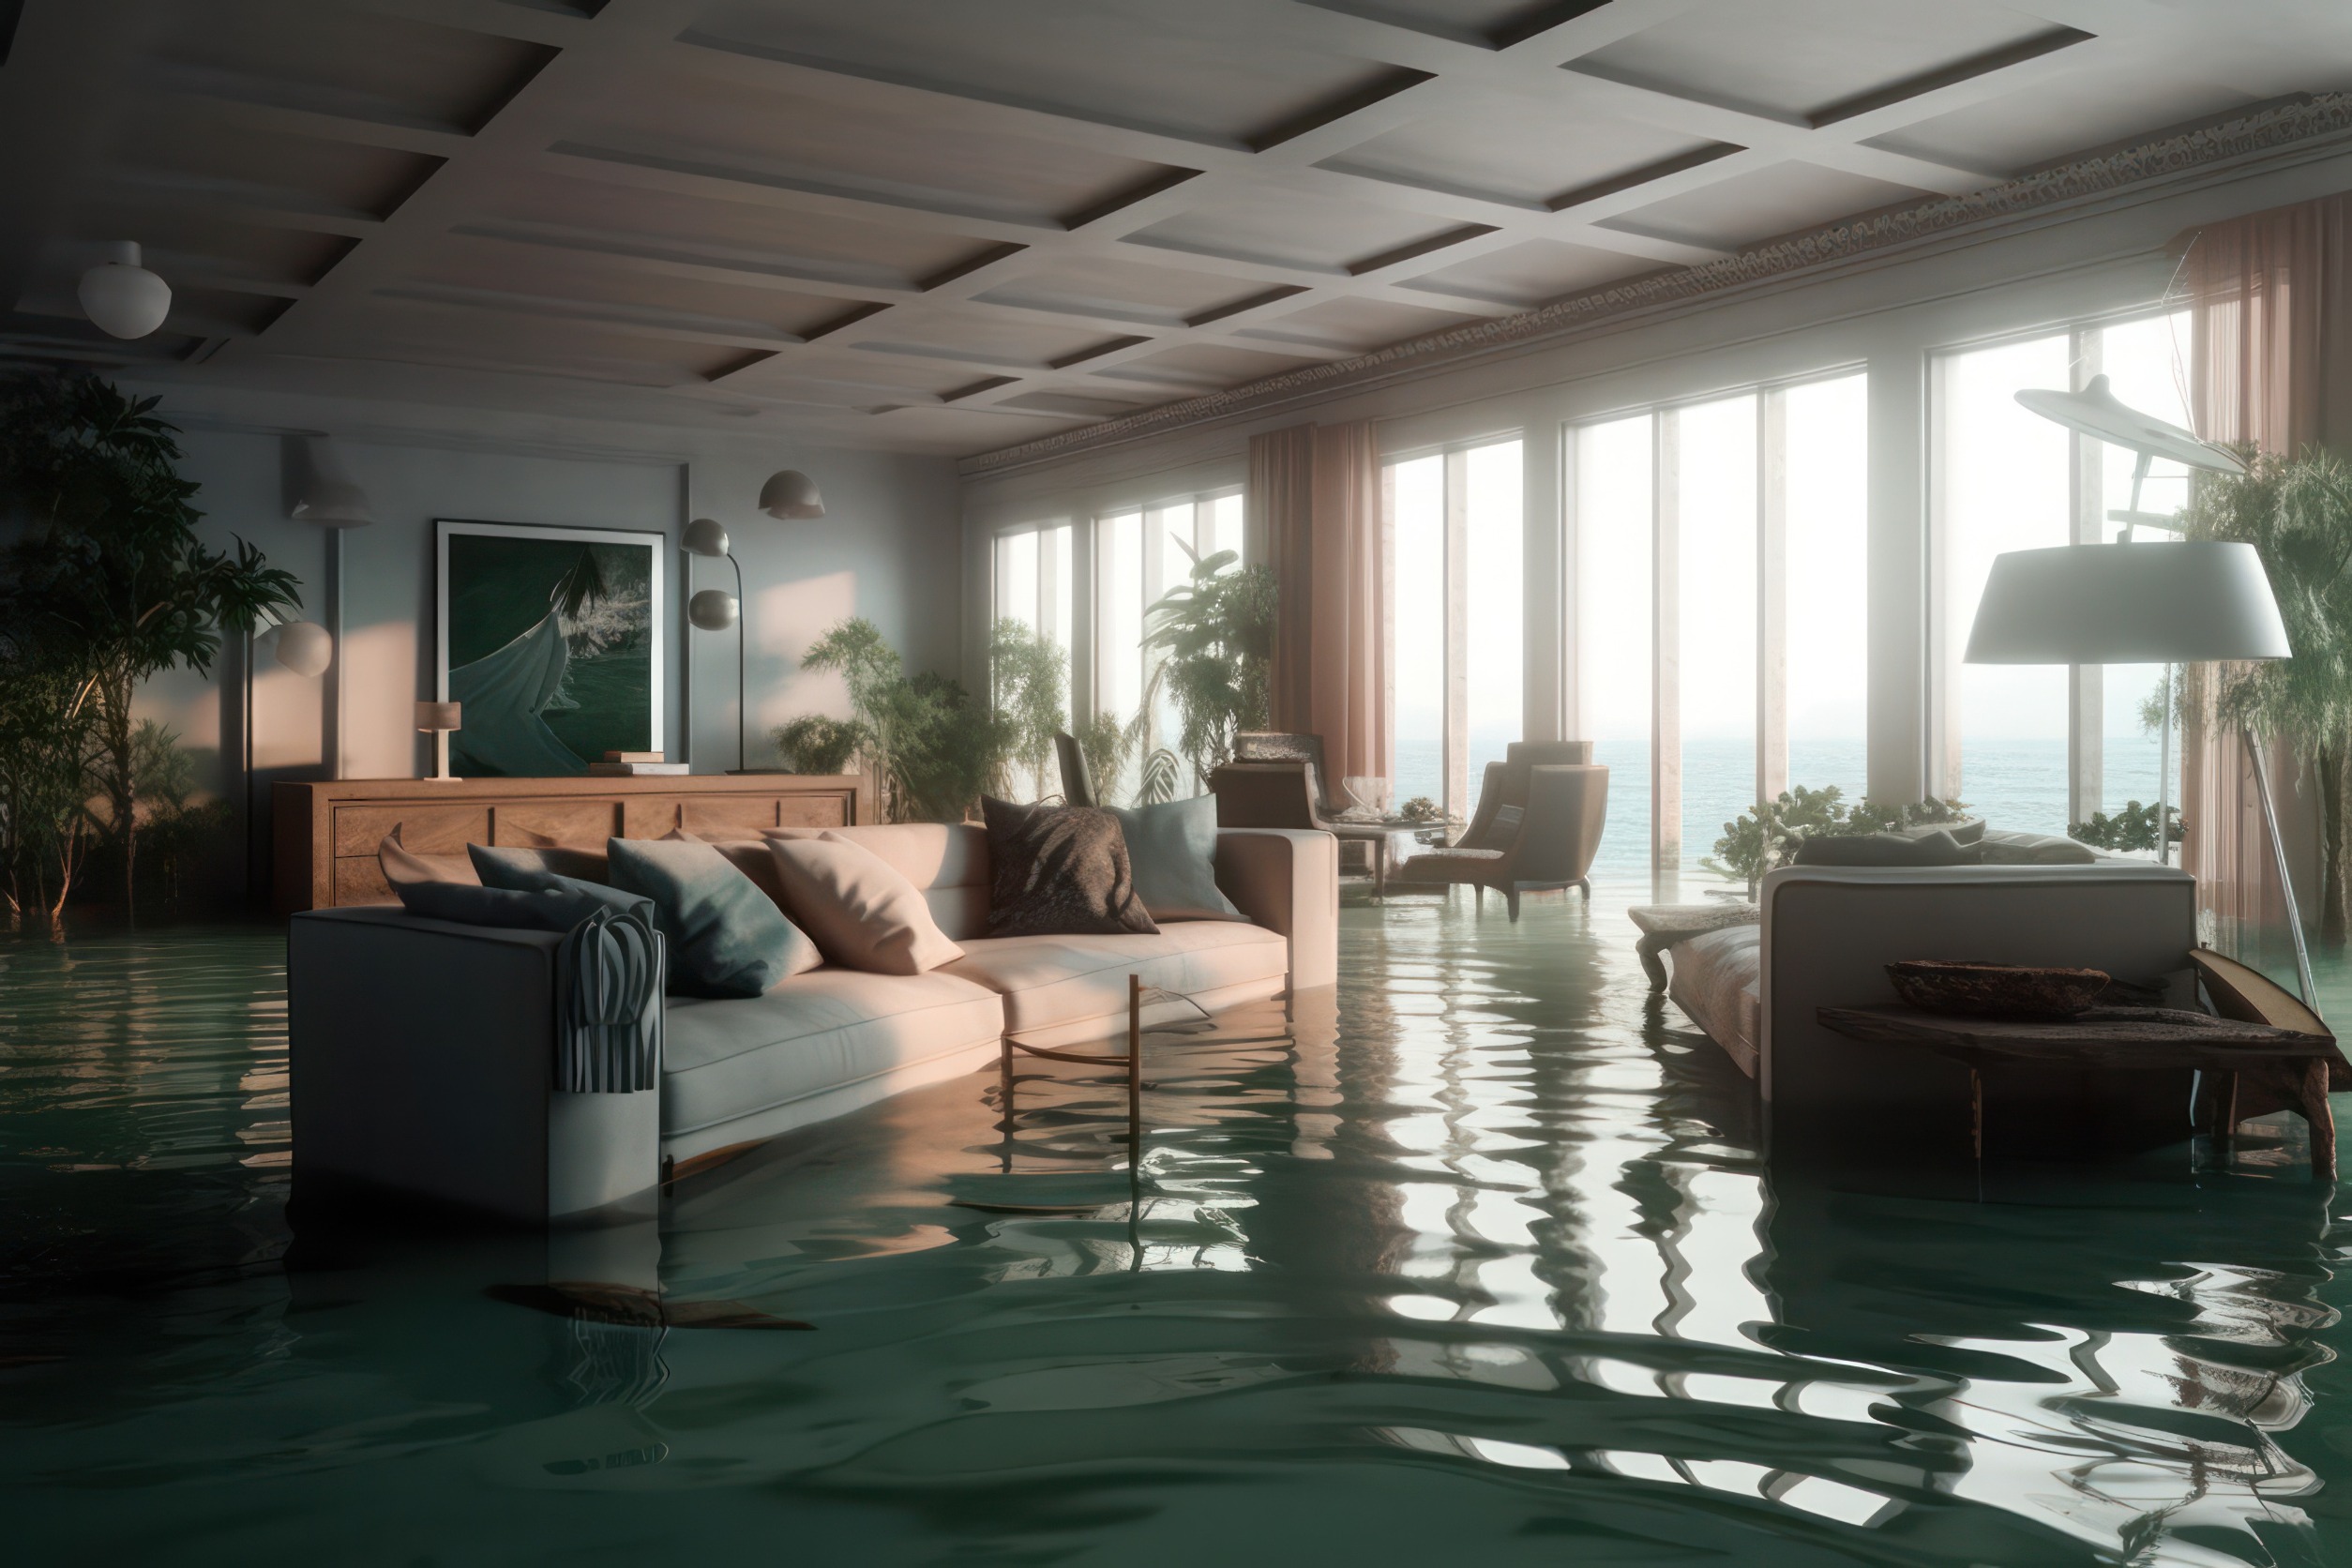 Fire or Flood? No Fear! Restoring Your Hotel After Damage